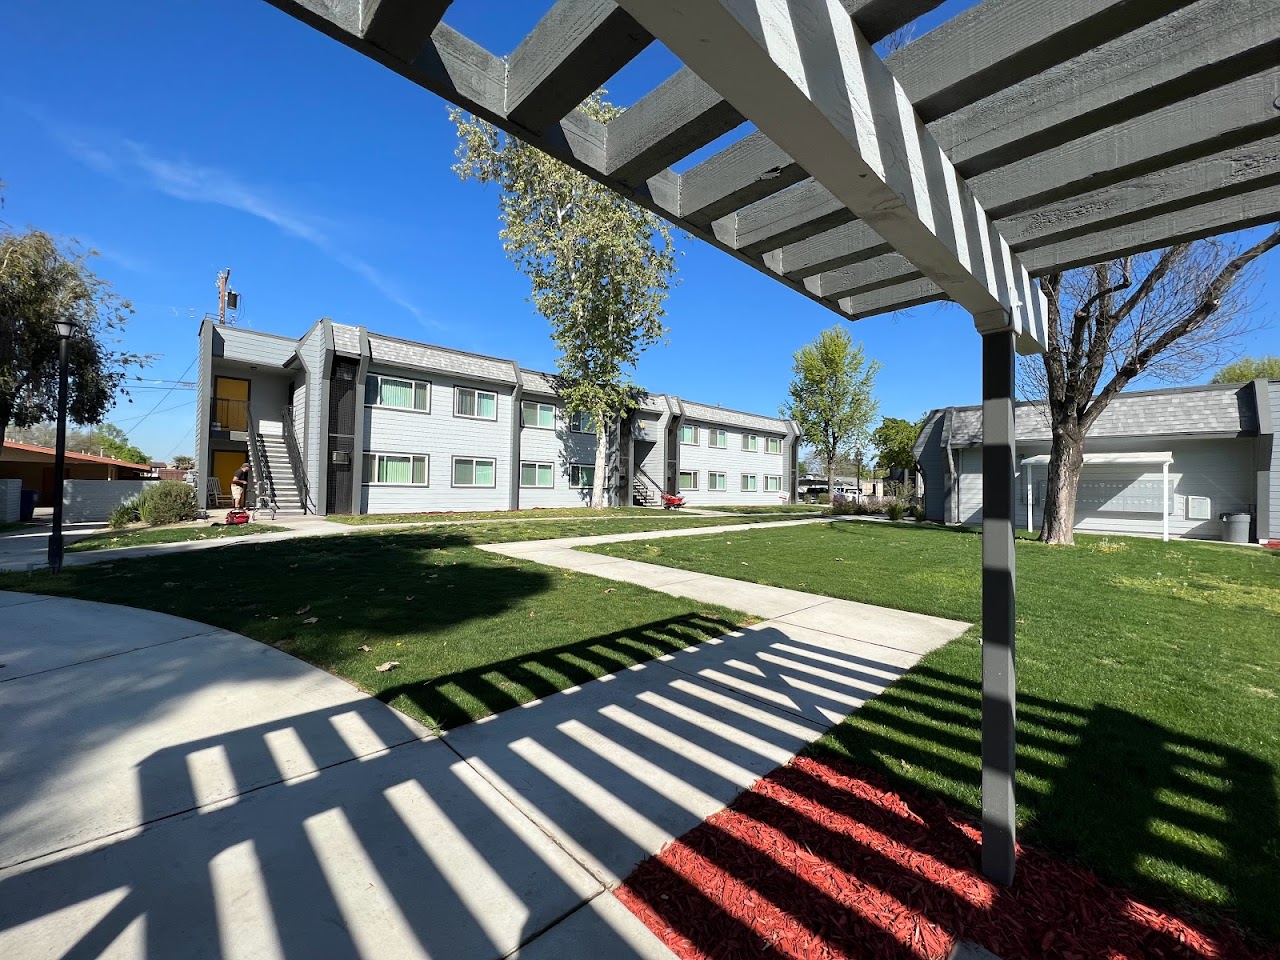 Photo of GRACE AND LAUGHTER APARTMENTS at 1051 N. EATON AVENUE DINUBA, CA 93618